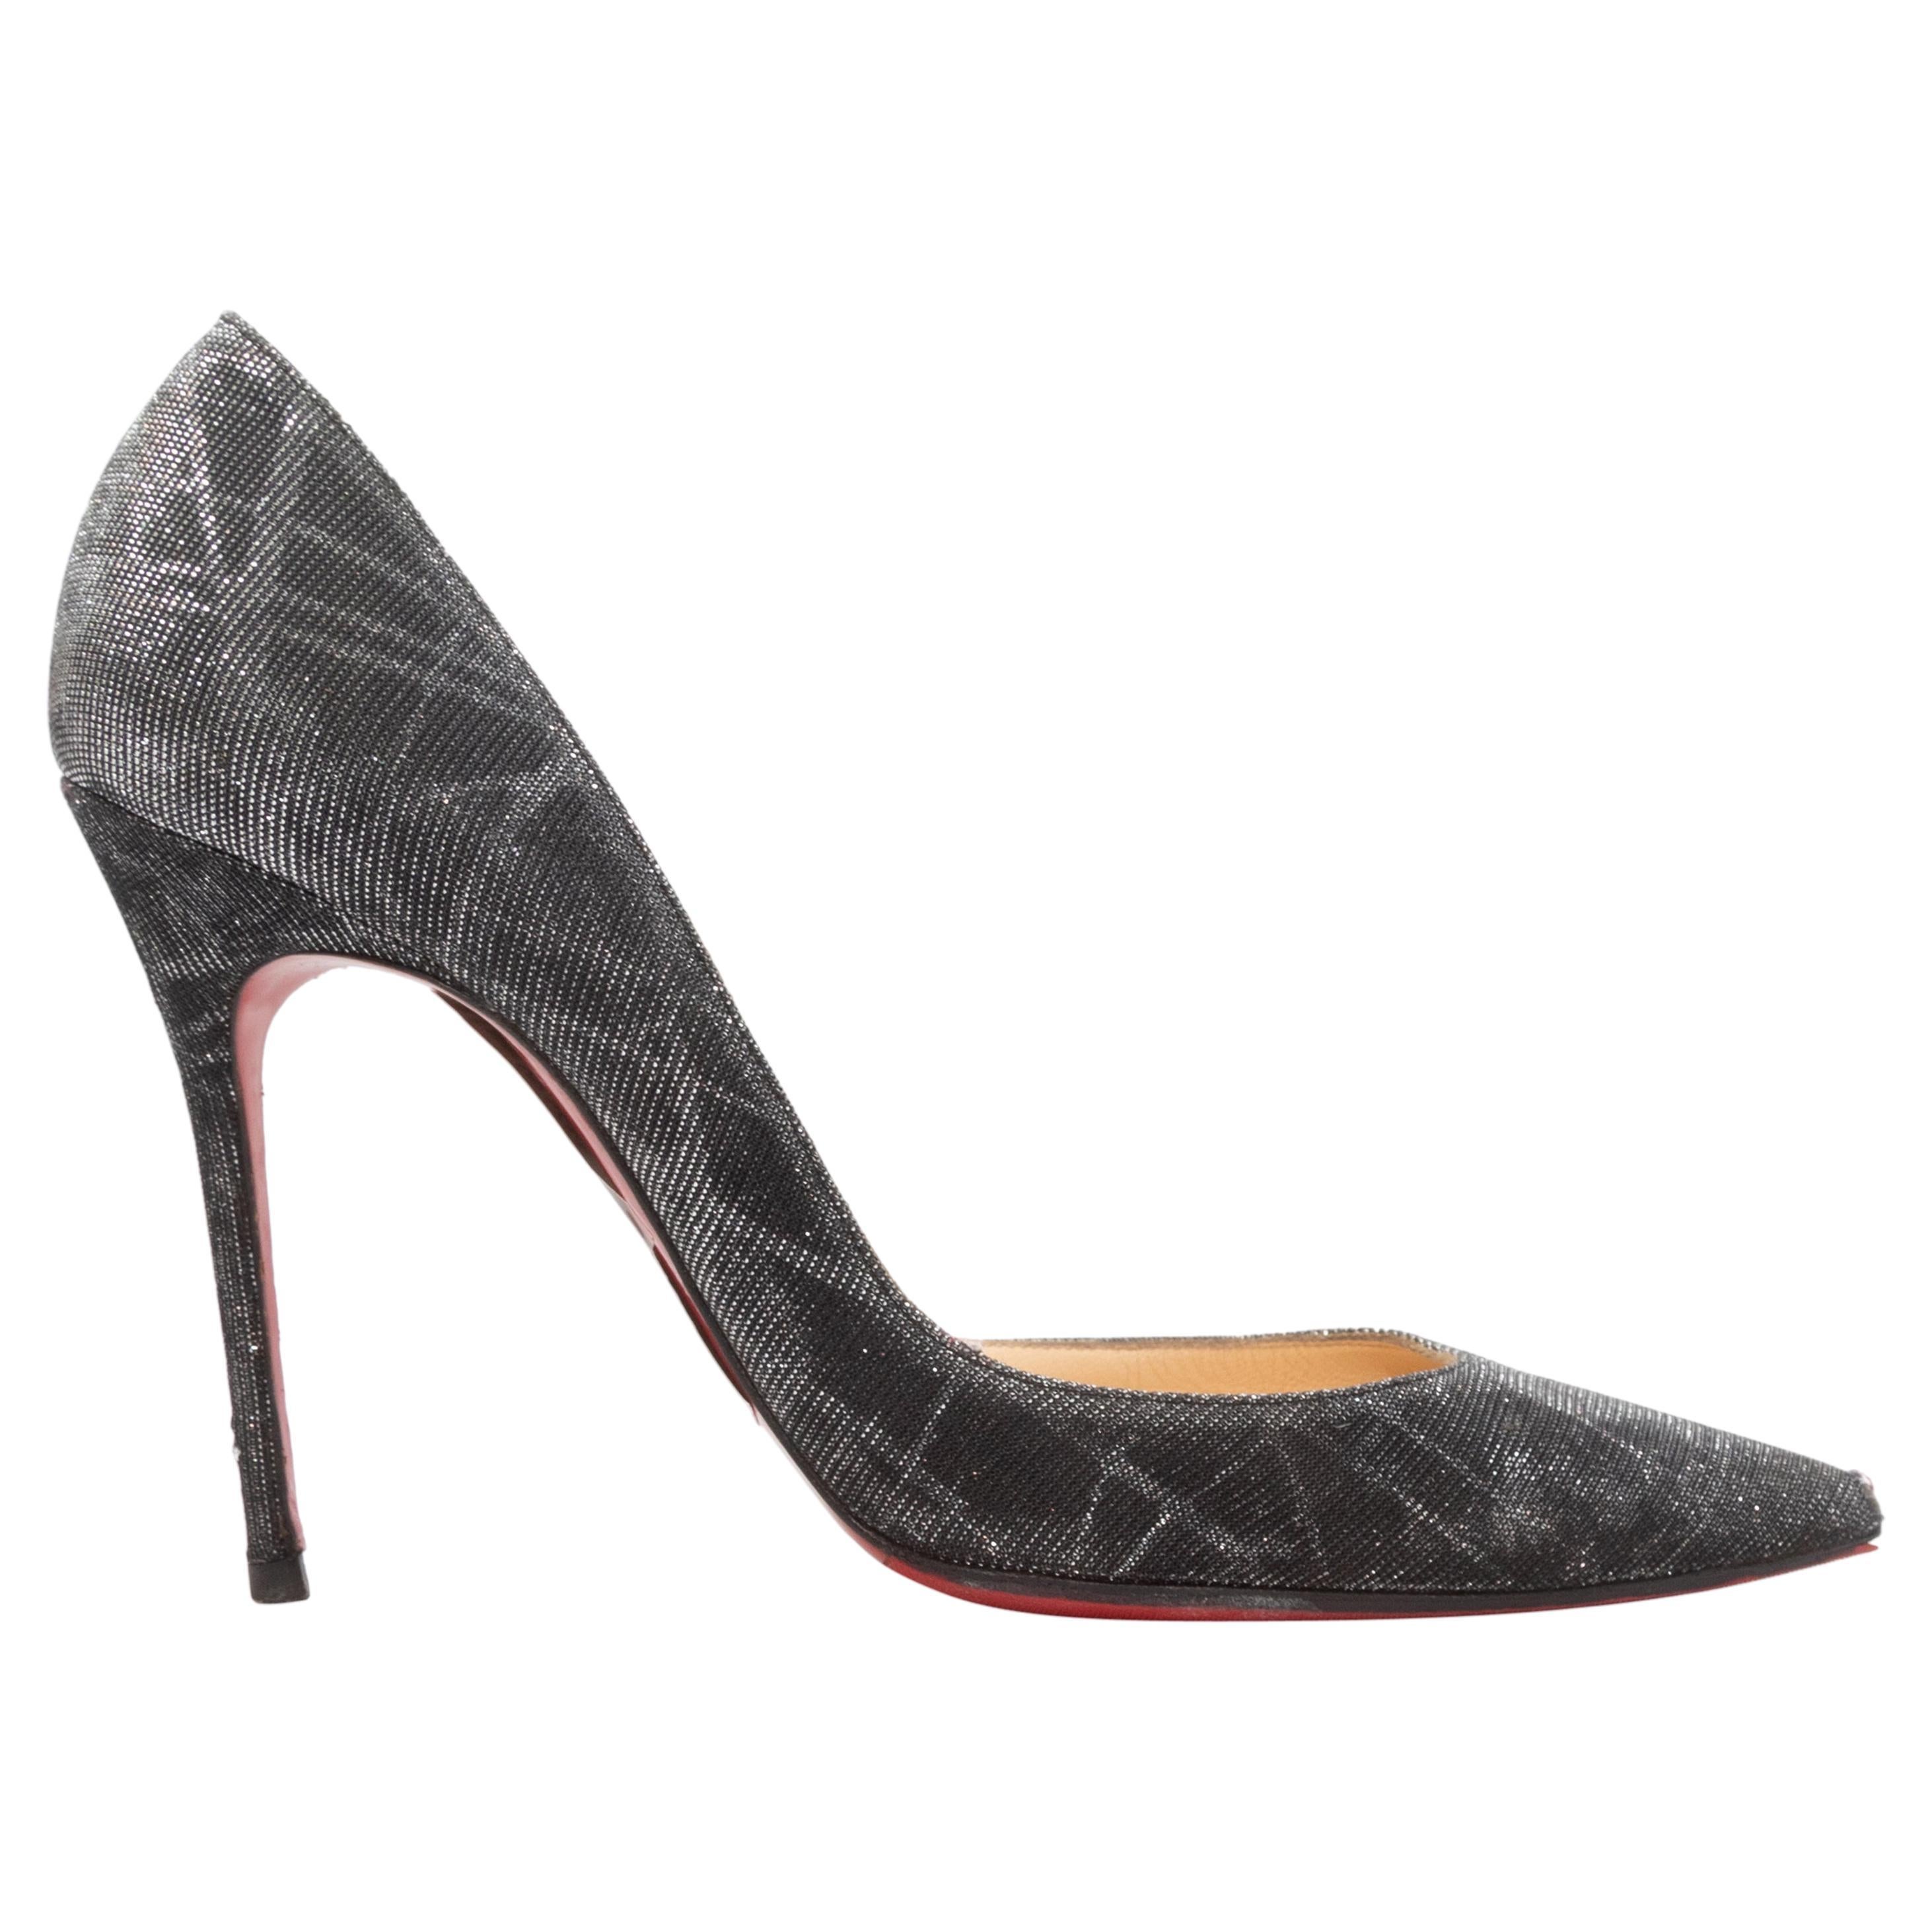 Black & Silver Christian Louboutin Pointed-Toe Pumps size 38